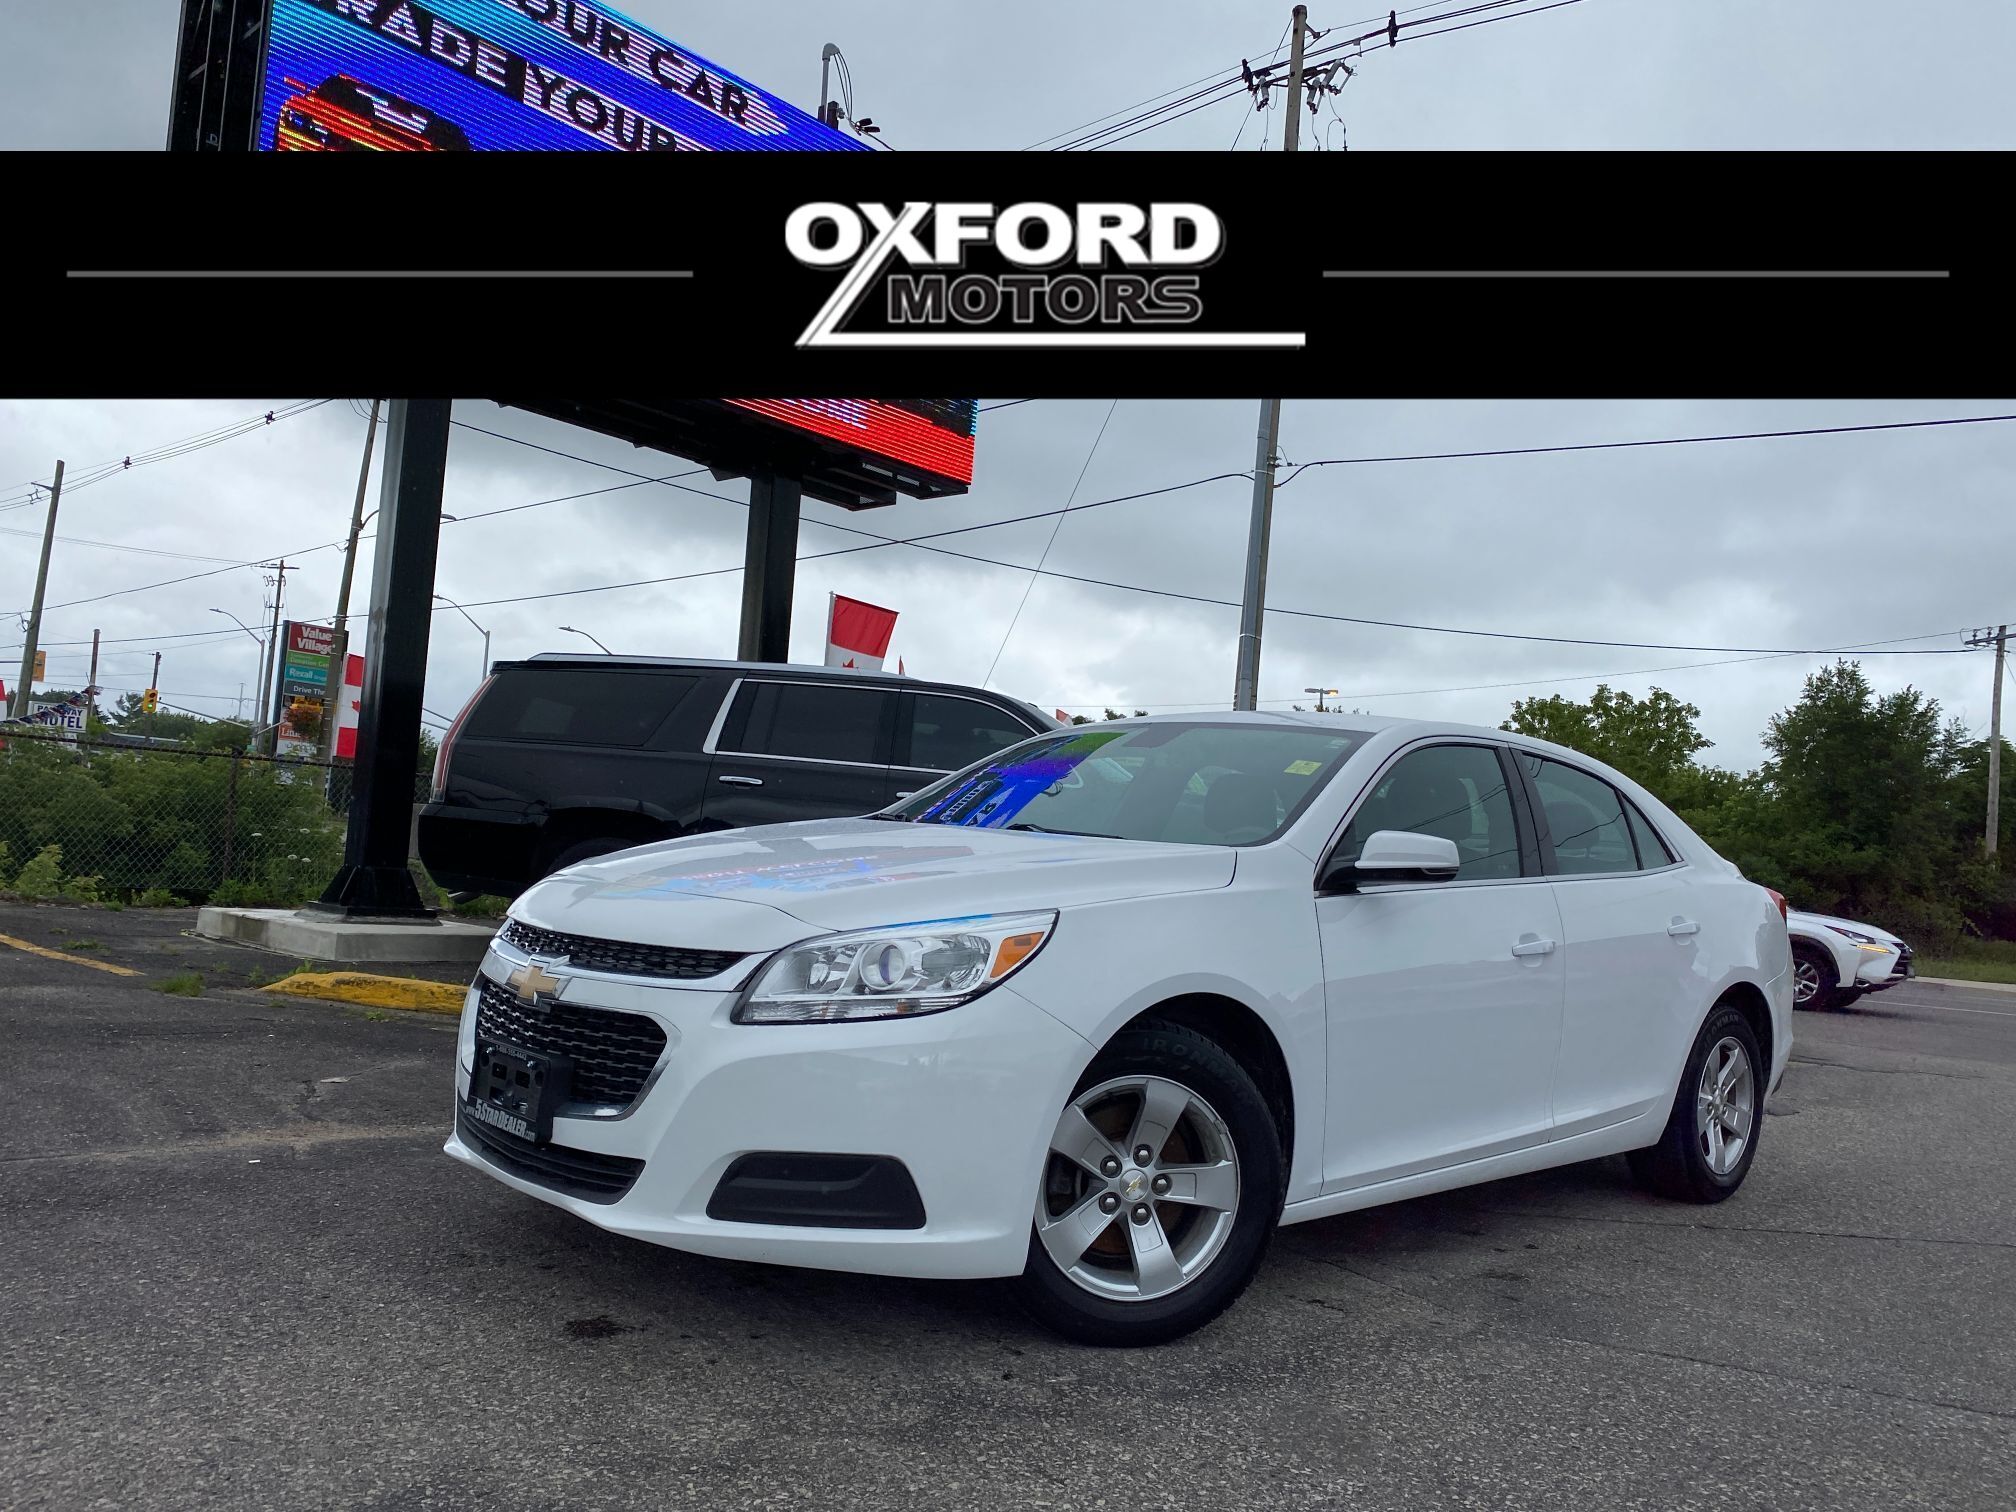 2016 Chevrolet Malibu CERTIFIED GREAT CONDITION!  WE FINANCE ALL CREDIT!